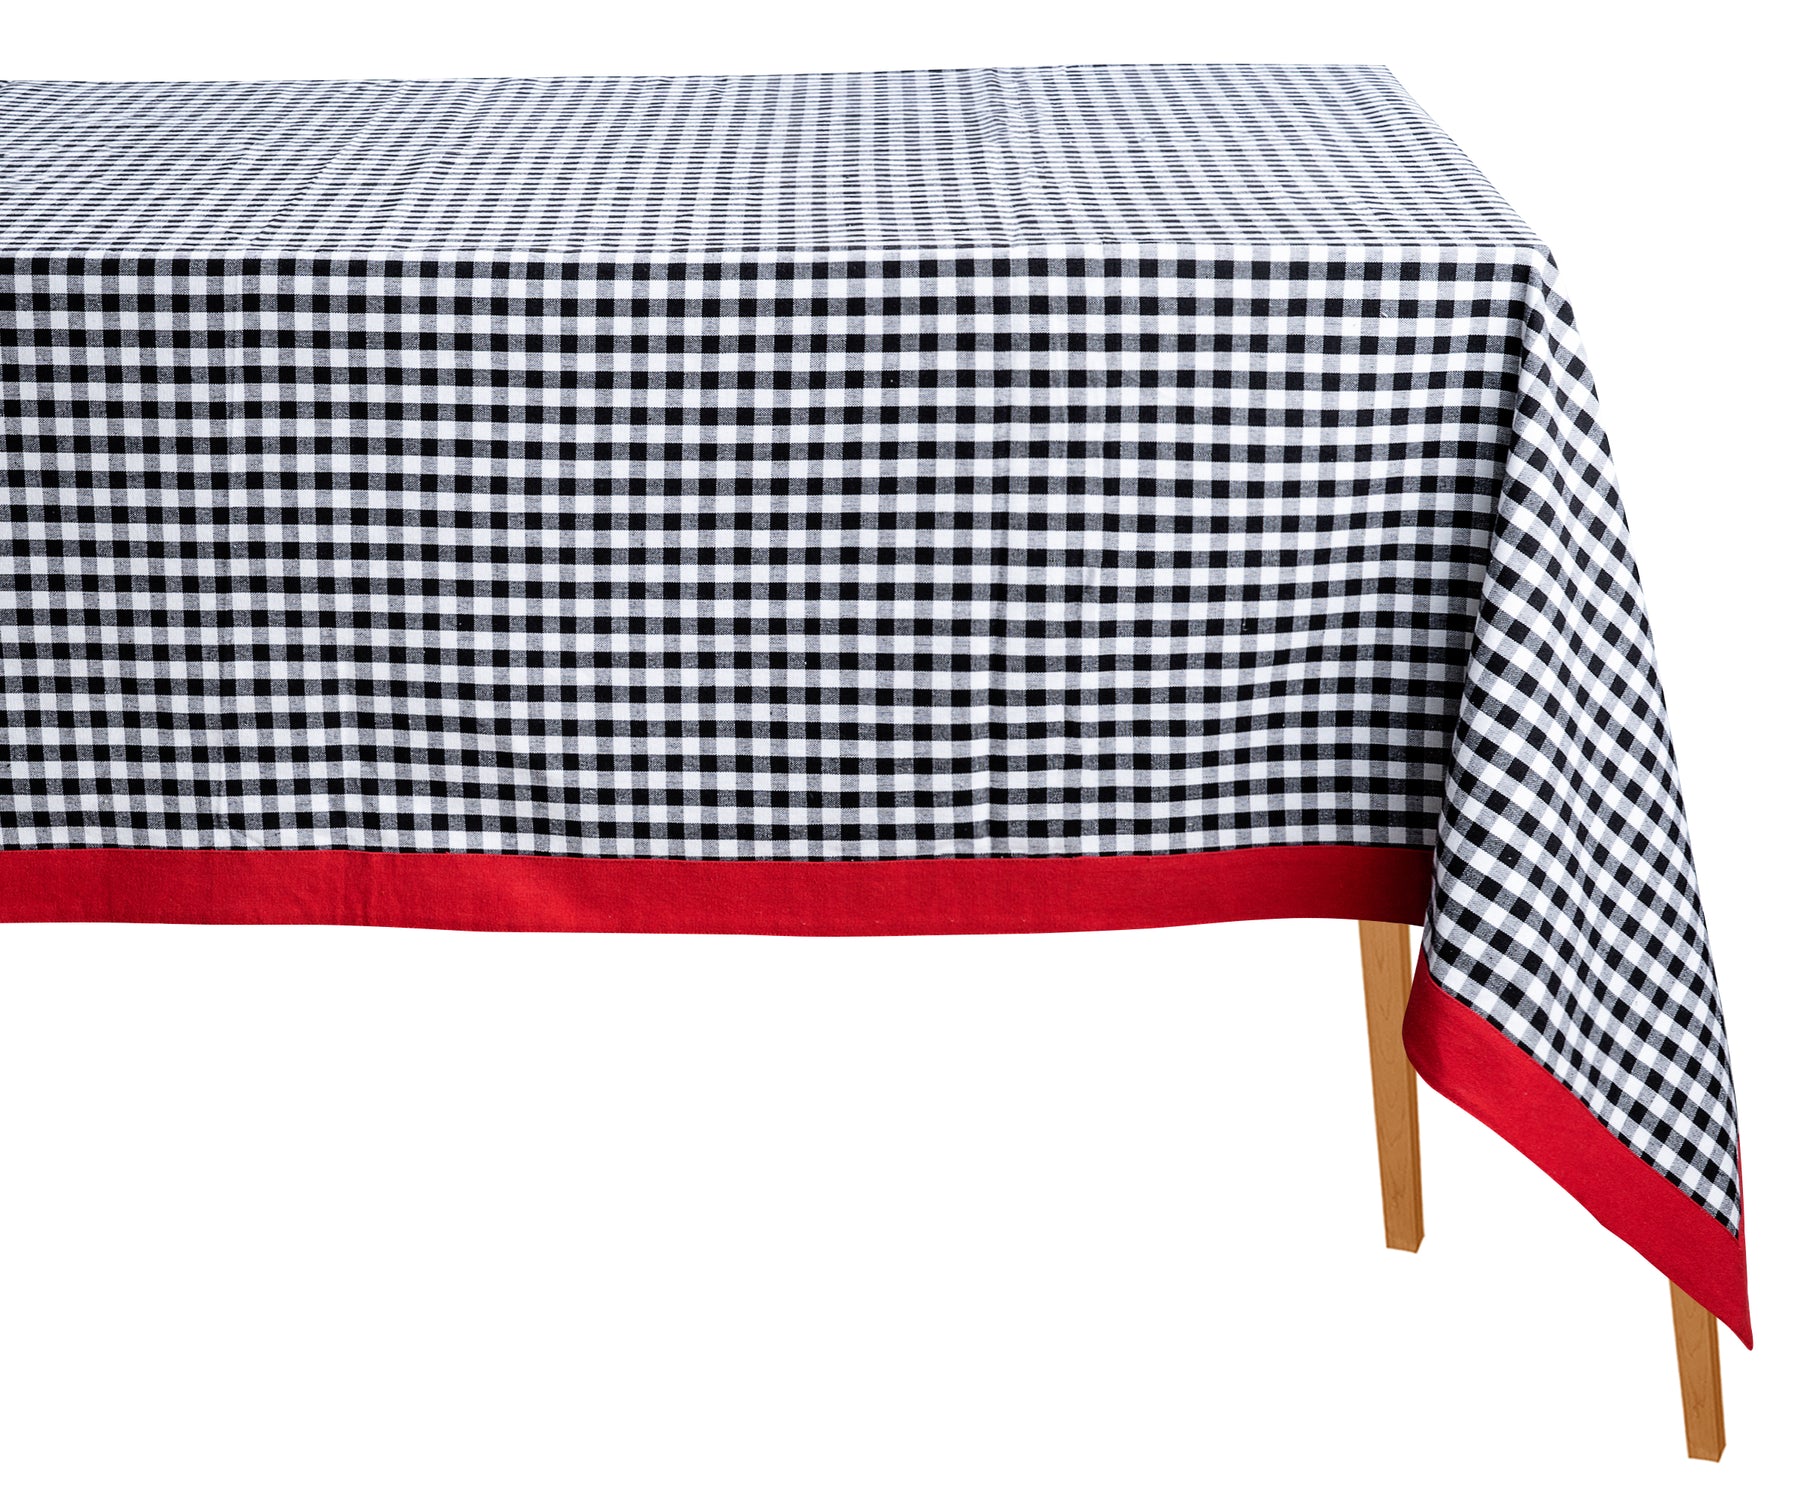 Cozy plaid tablecloth in cotton, ideal for relaxed gatherings.